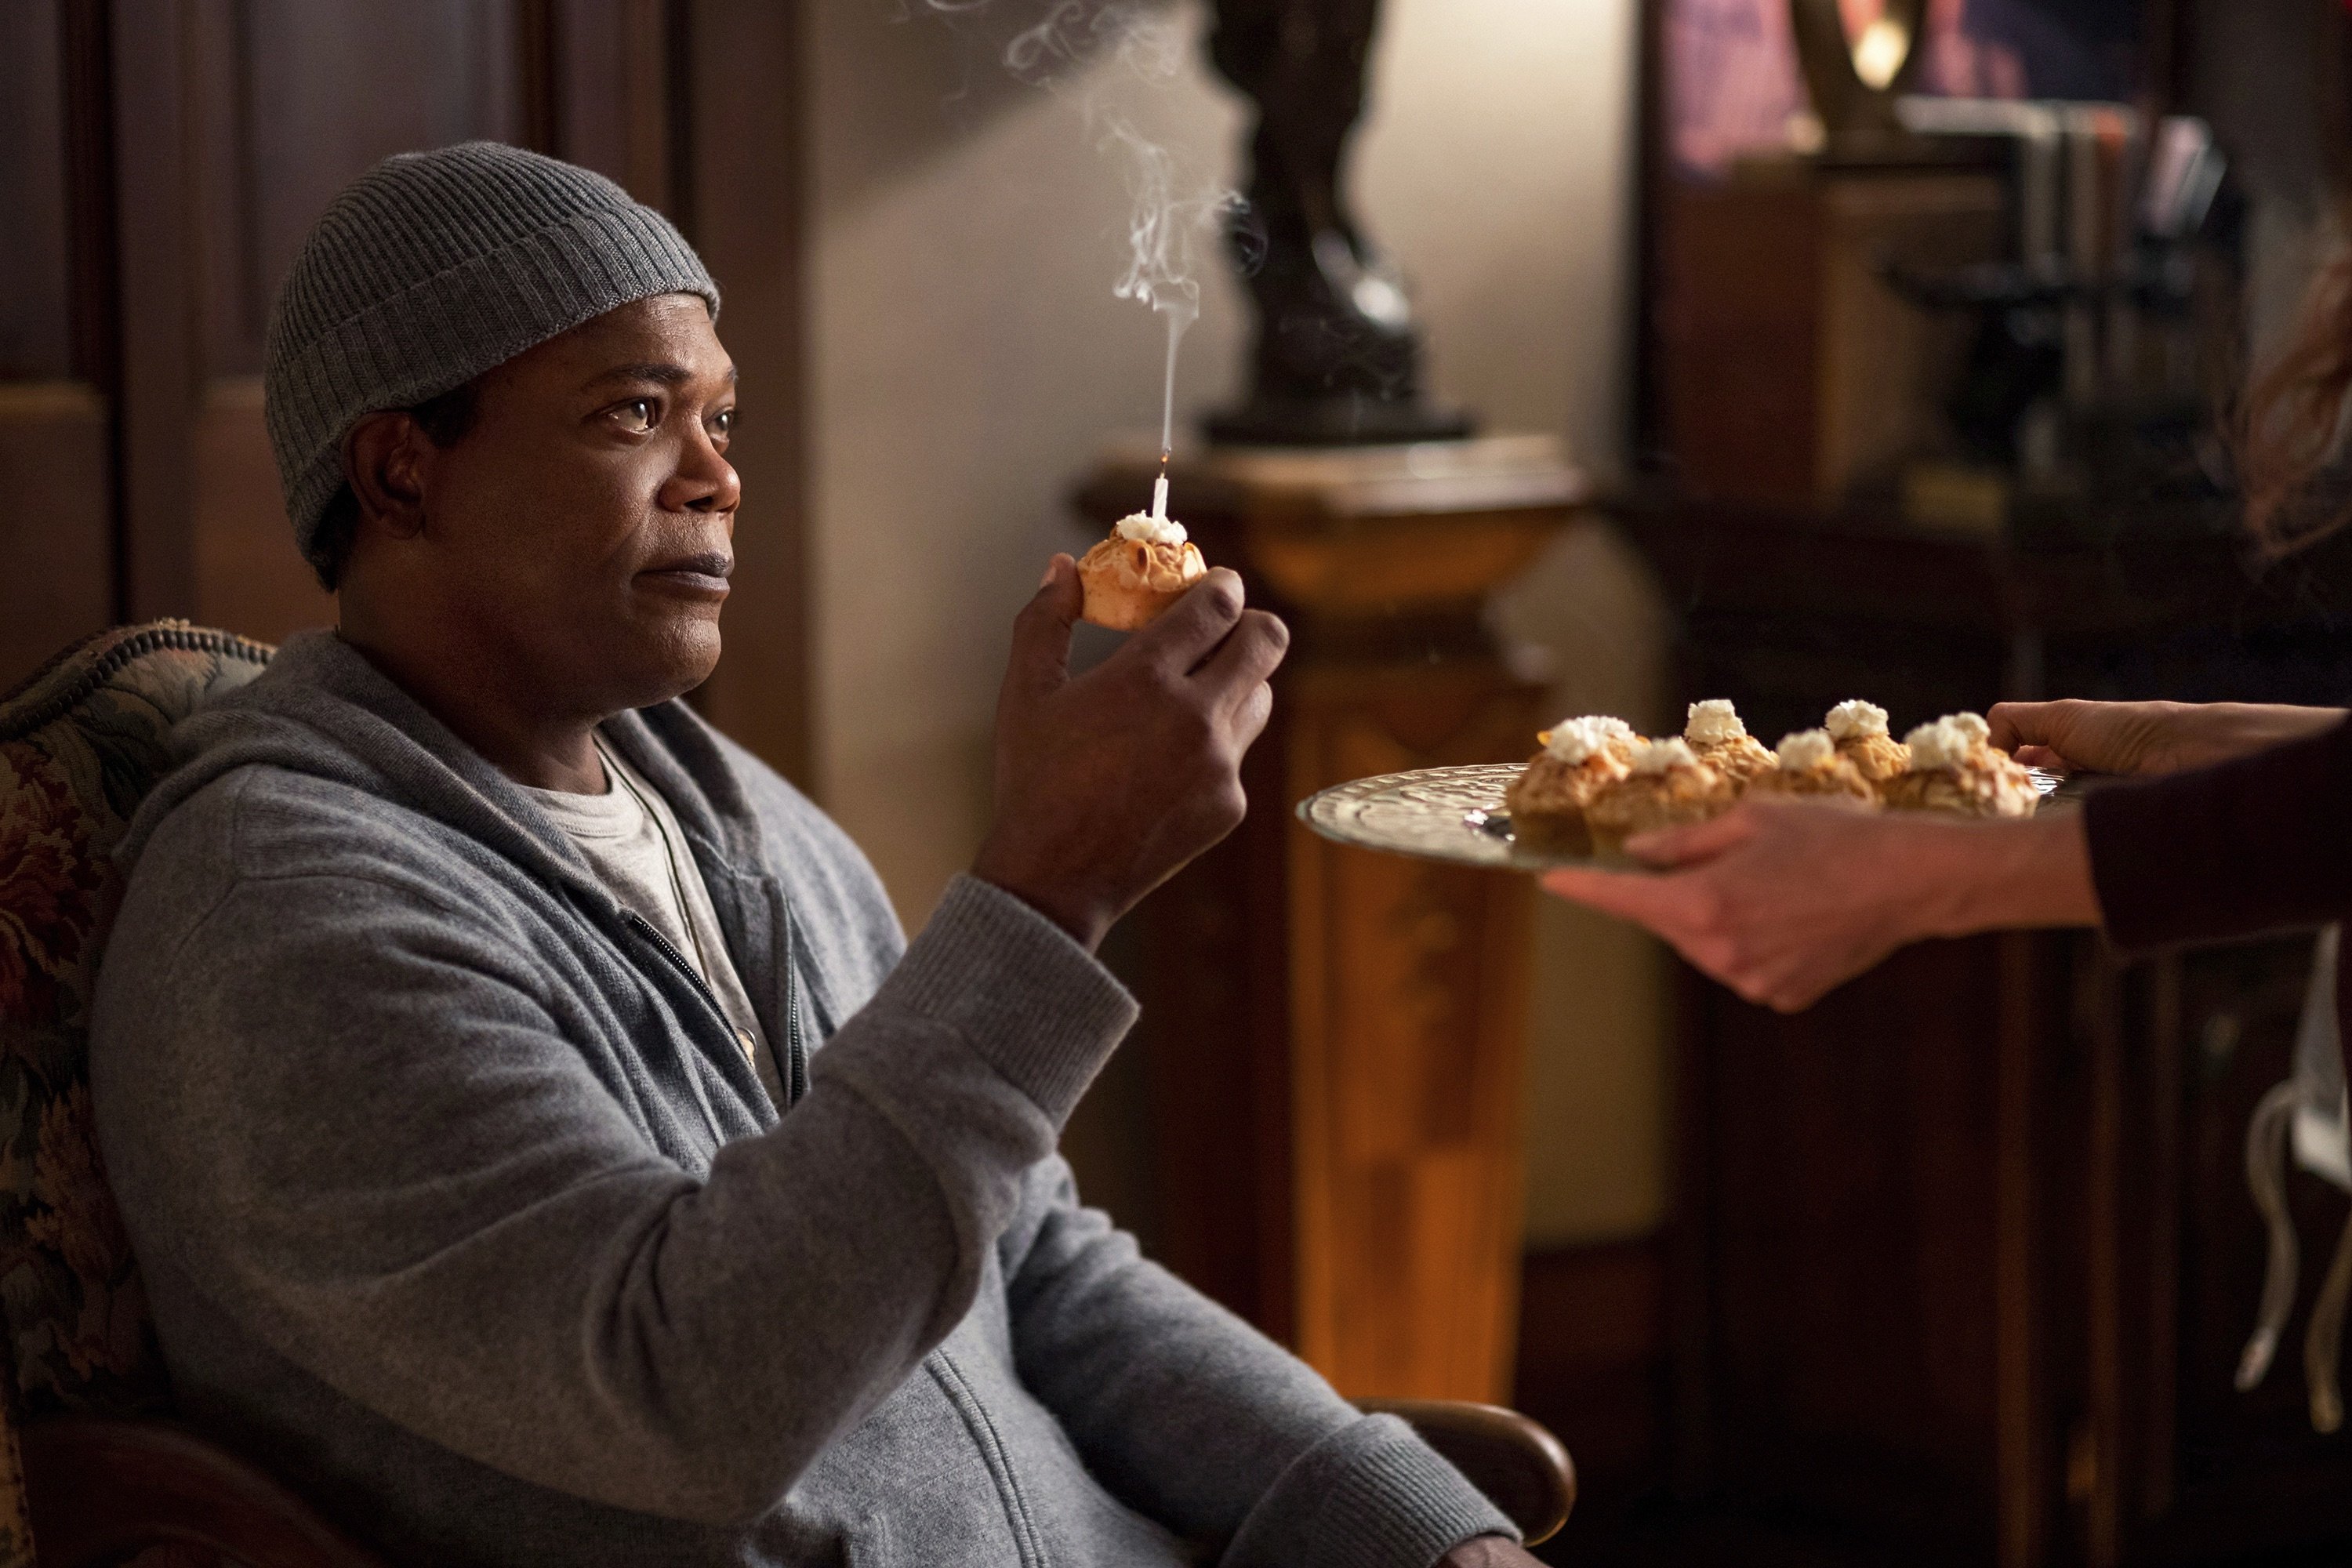 Samuel L. Jackson, in a scene from the film “The Protege.” (Lionsgate via AP)